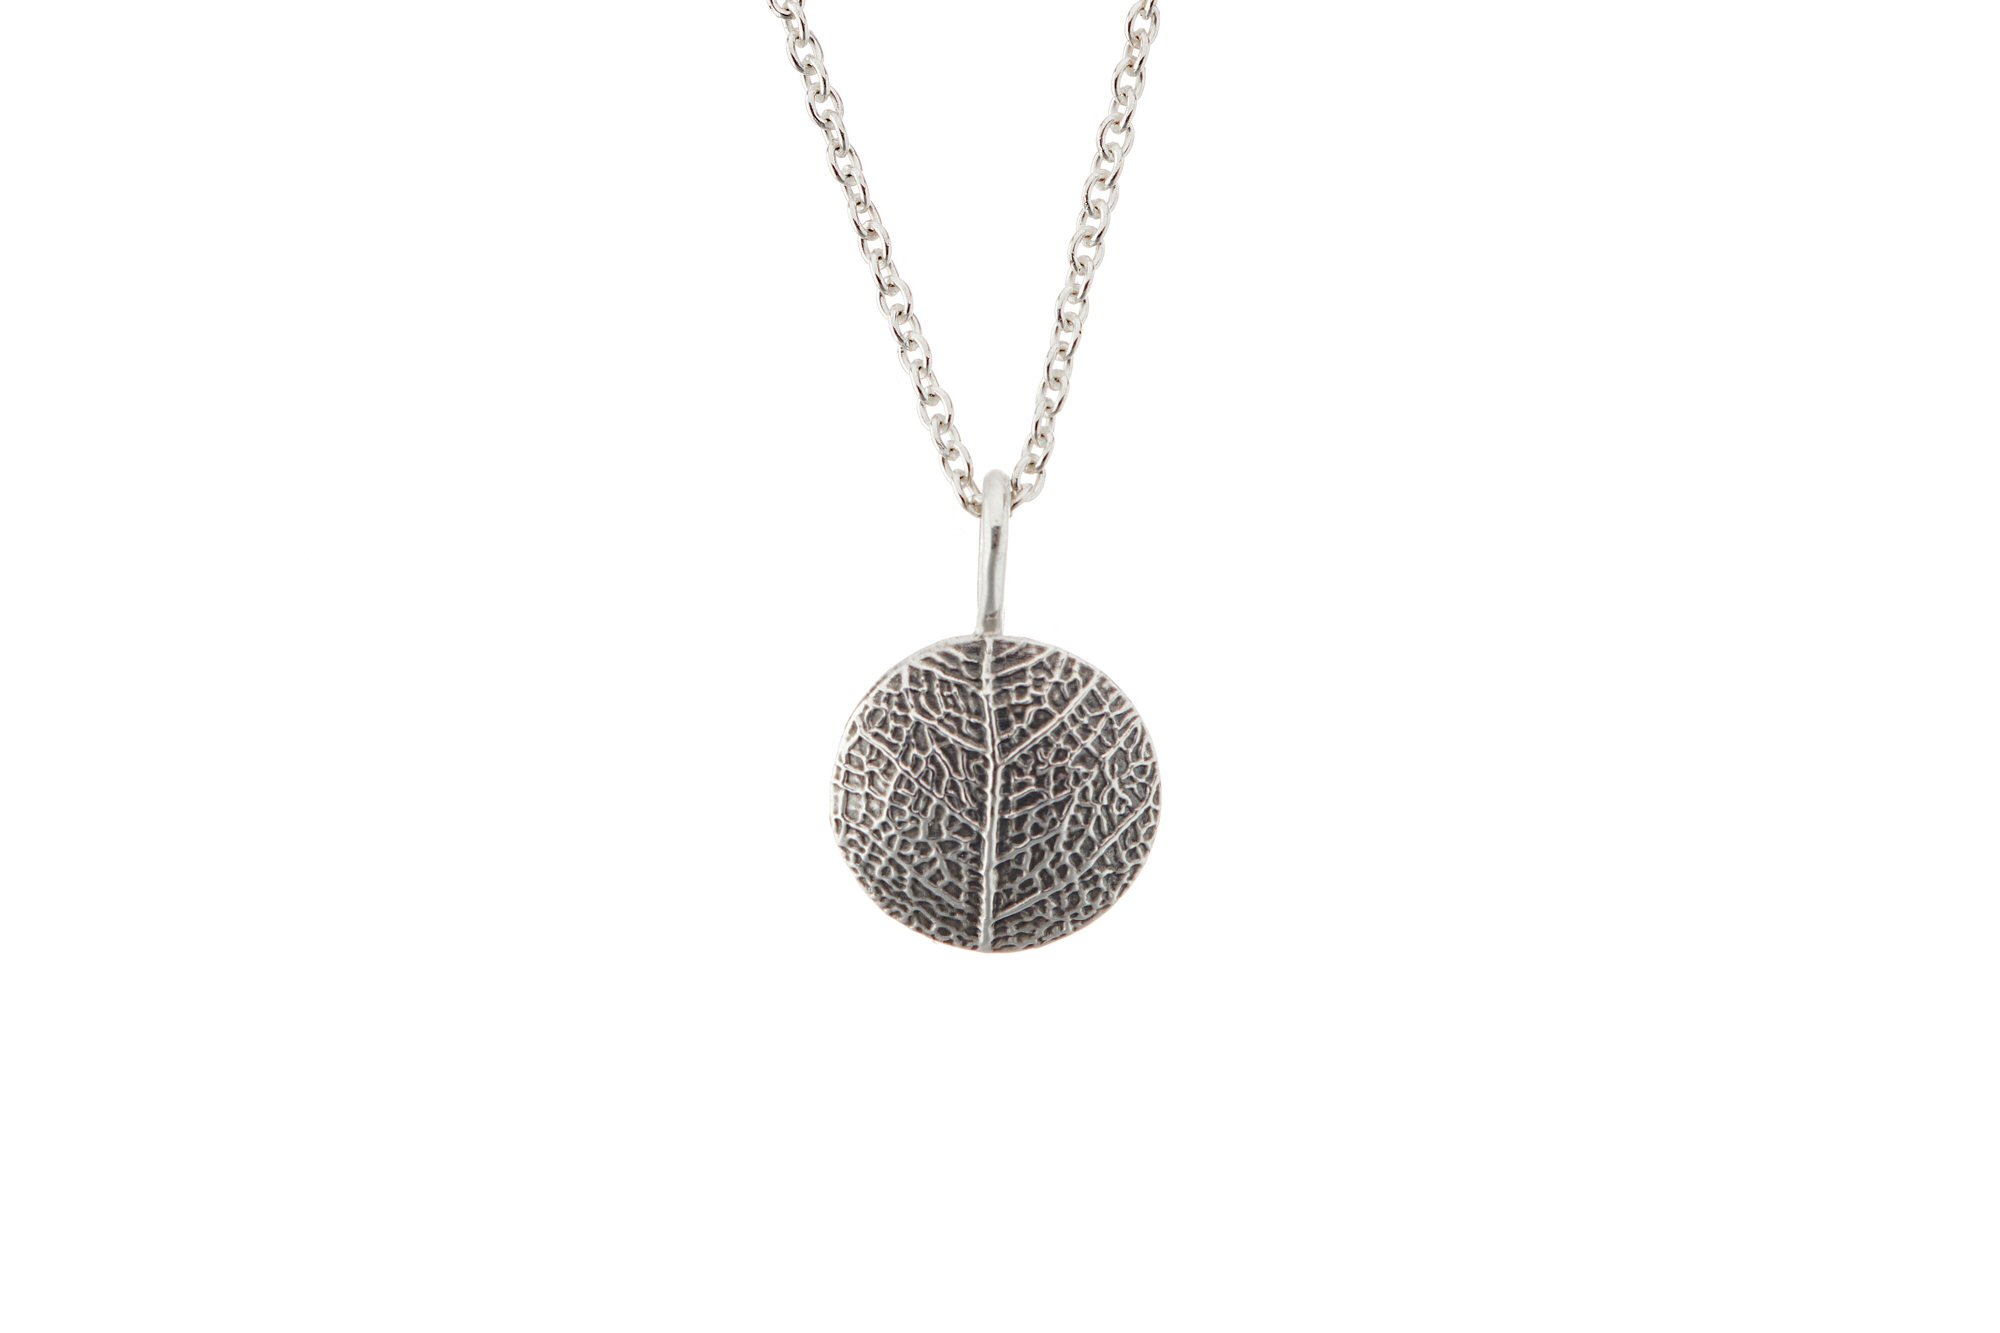 Pendants - Lucy Jade Sylvester - Jewellery Textured by Nature